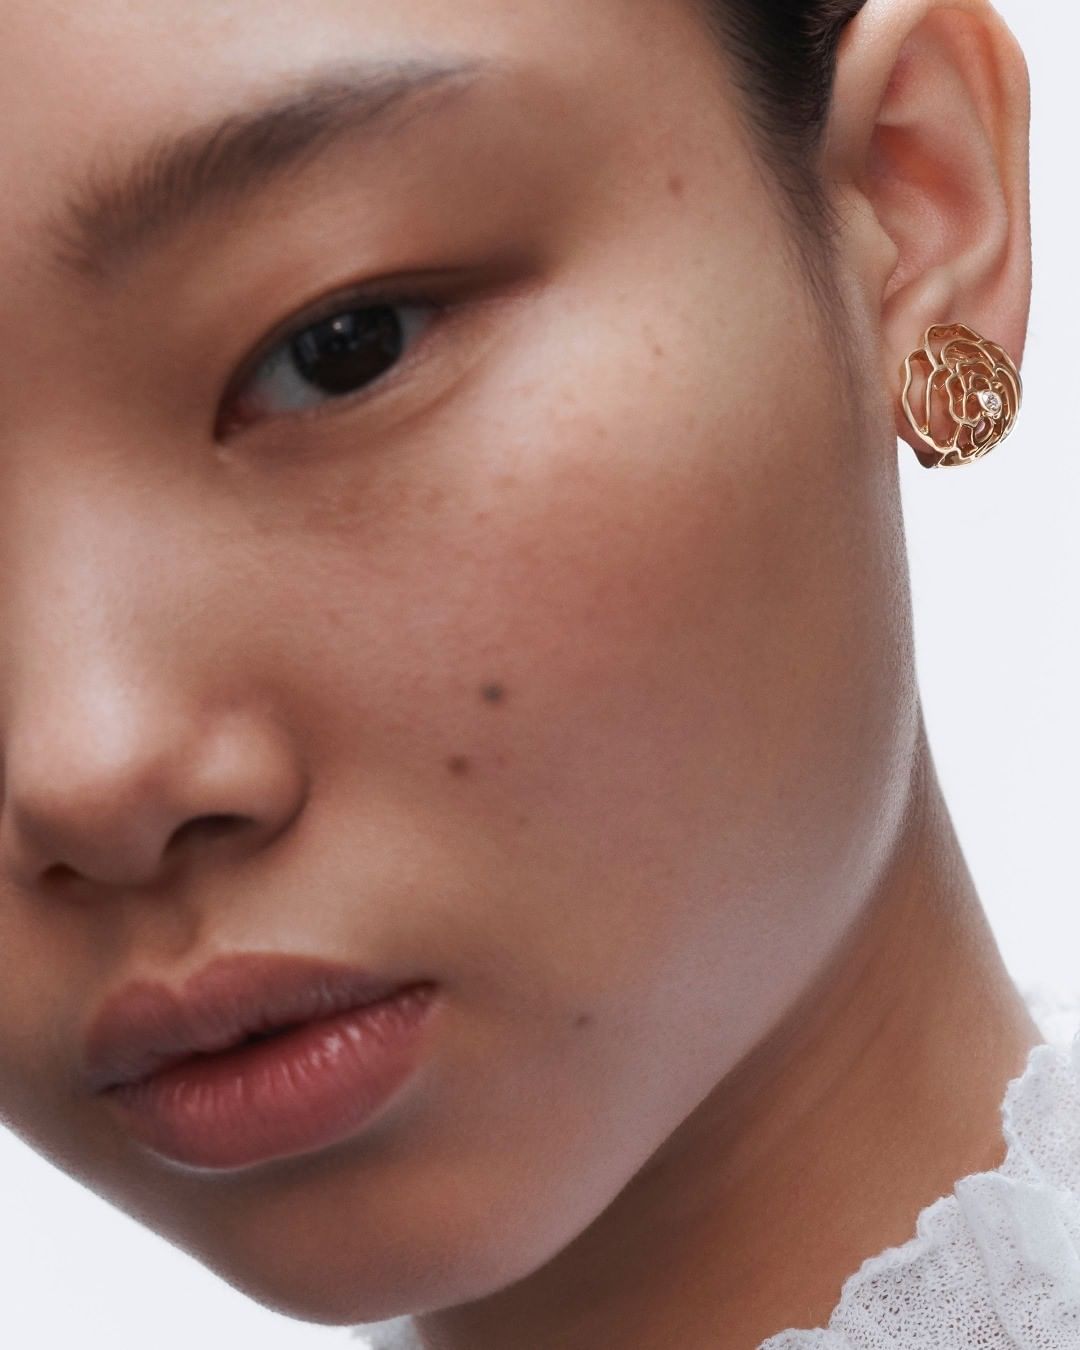 CHANEL - THE VOCABULARY OF STYLE
ASYMMETRY. Showcase your earring by wearing it on just one side.

Discover CHANEL earrings. Link in bio.

#CHANELFineJewelry #COCOCRUSH #CameliaCollection #CHANELComet...